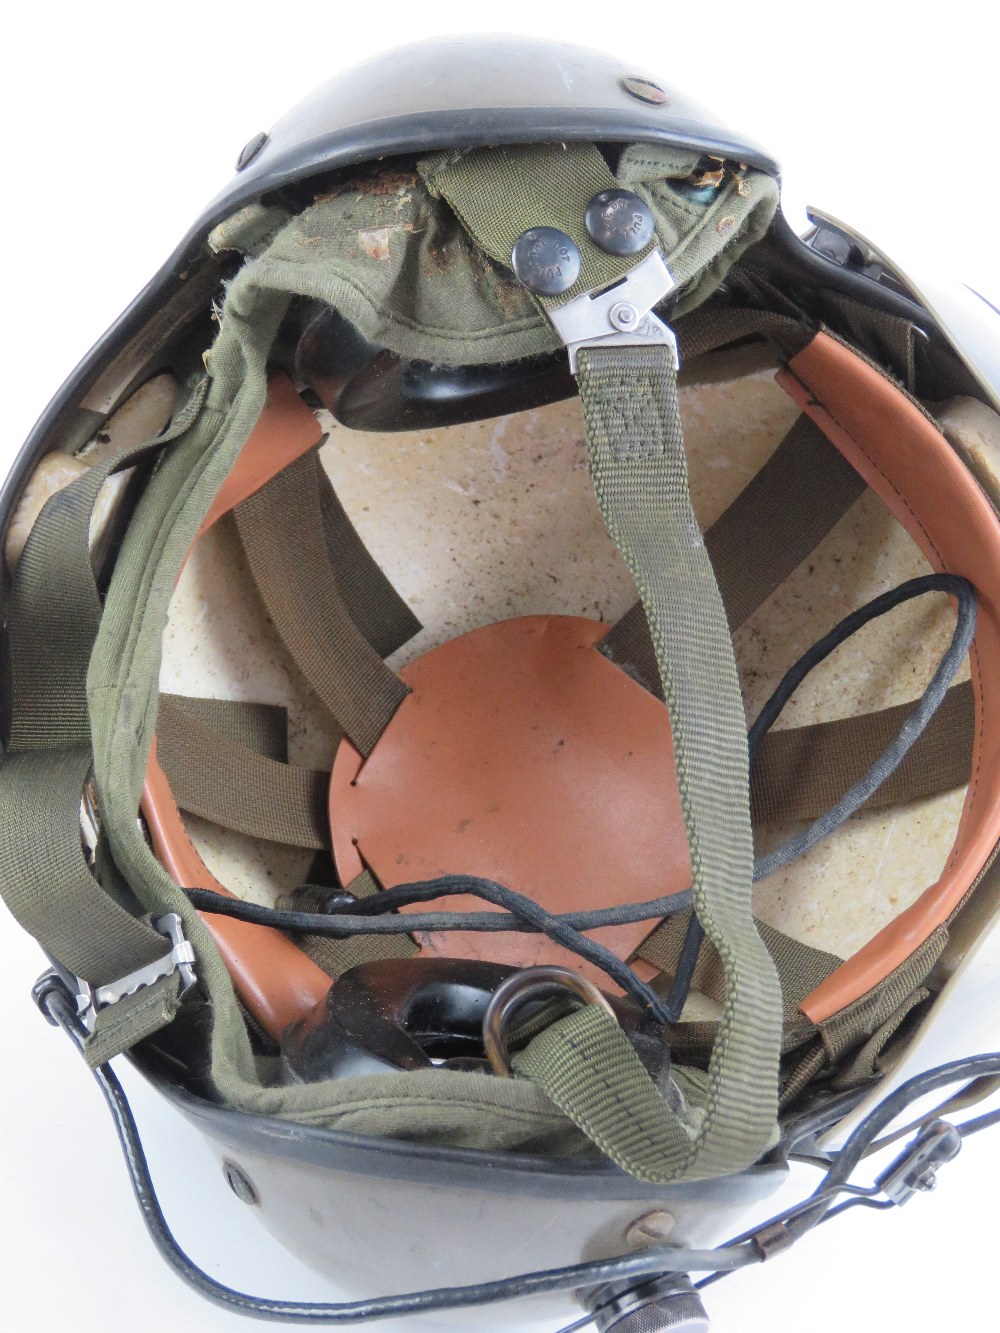 A 1971 Gentex US Pilots helmet in box with instructions. - Image 5 of 8